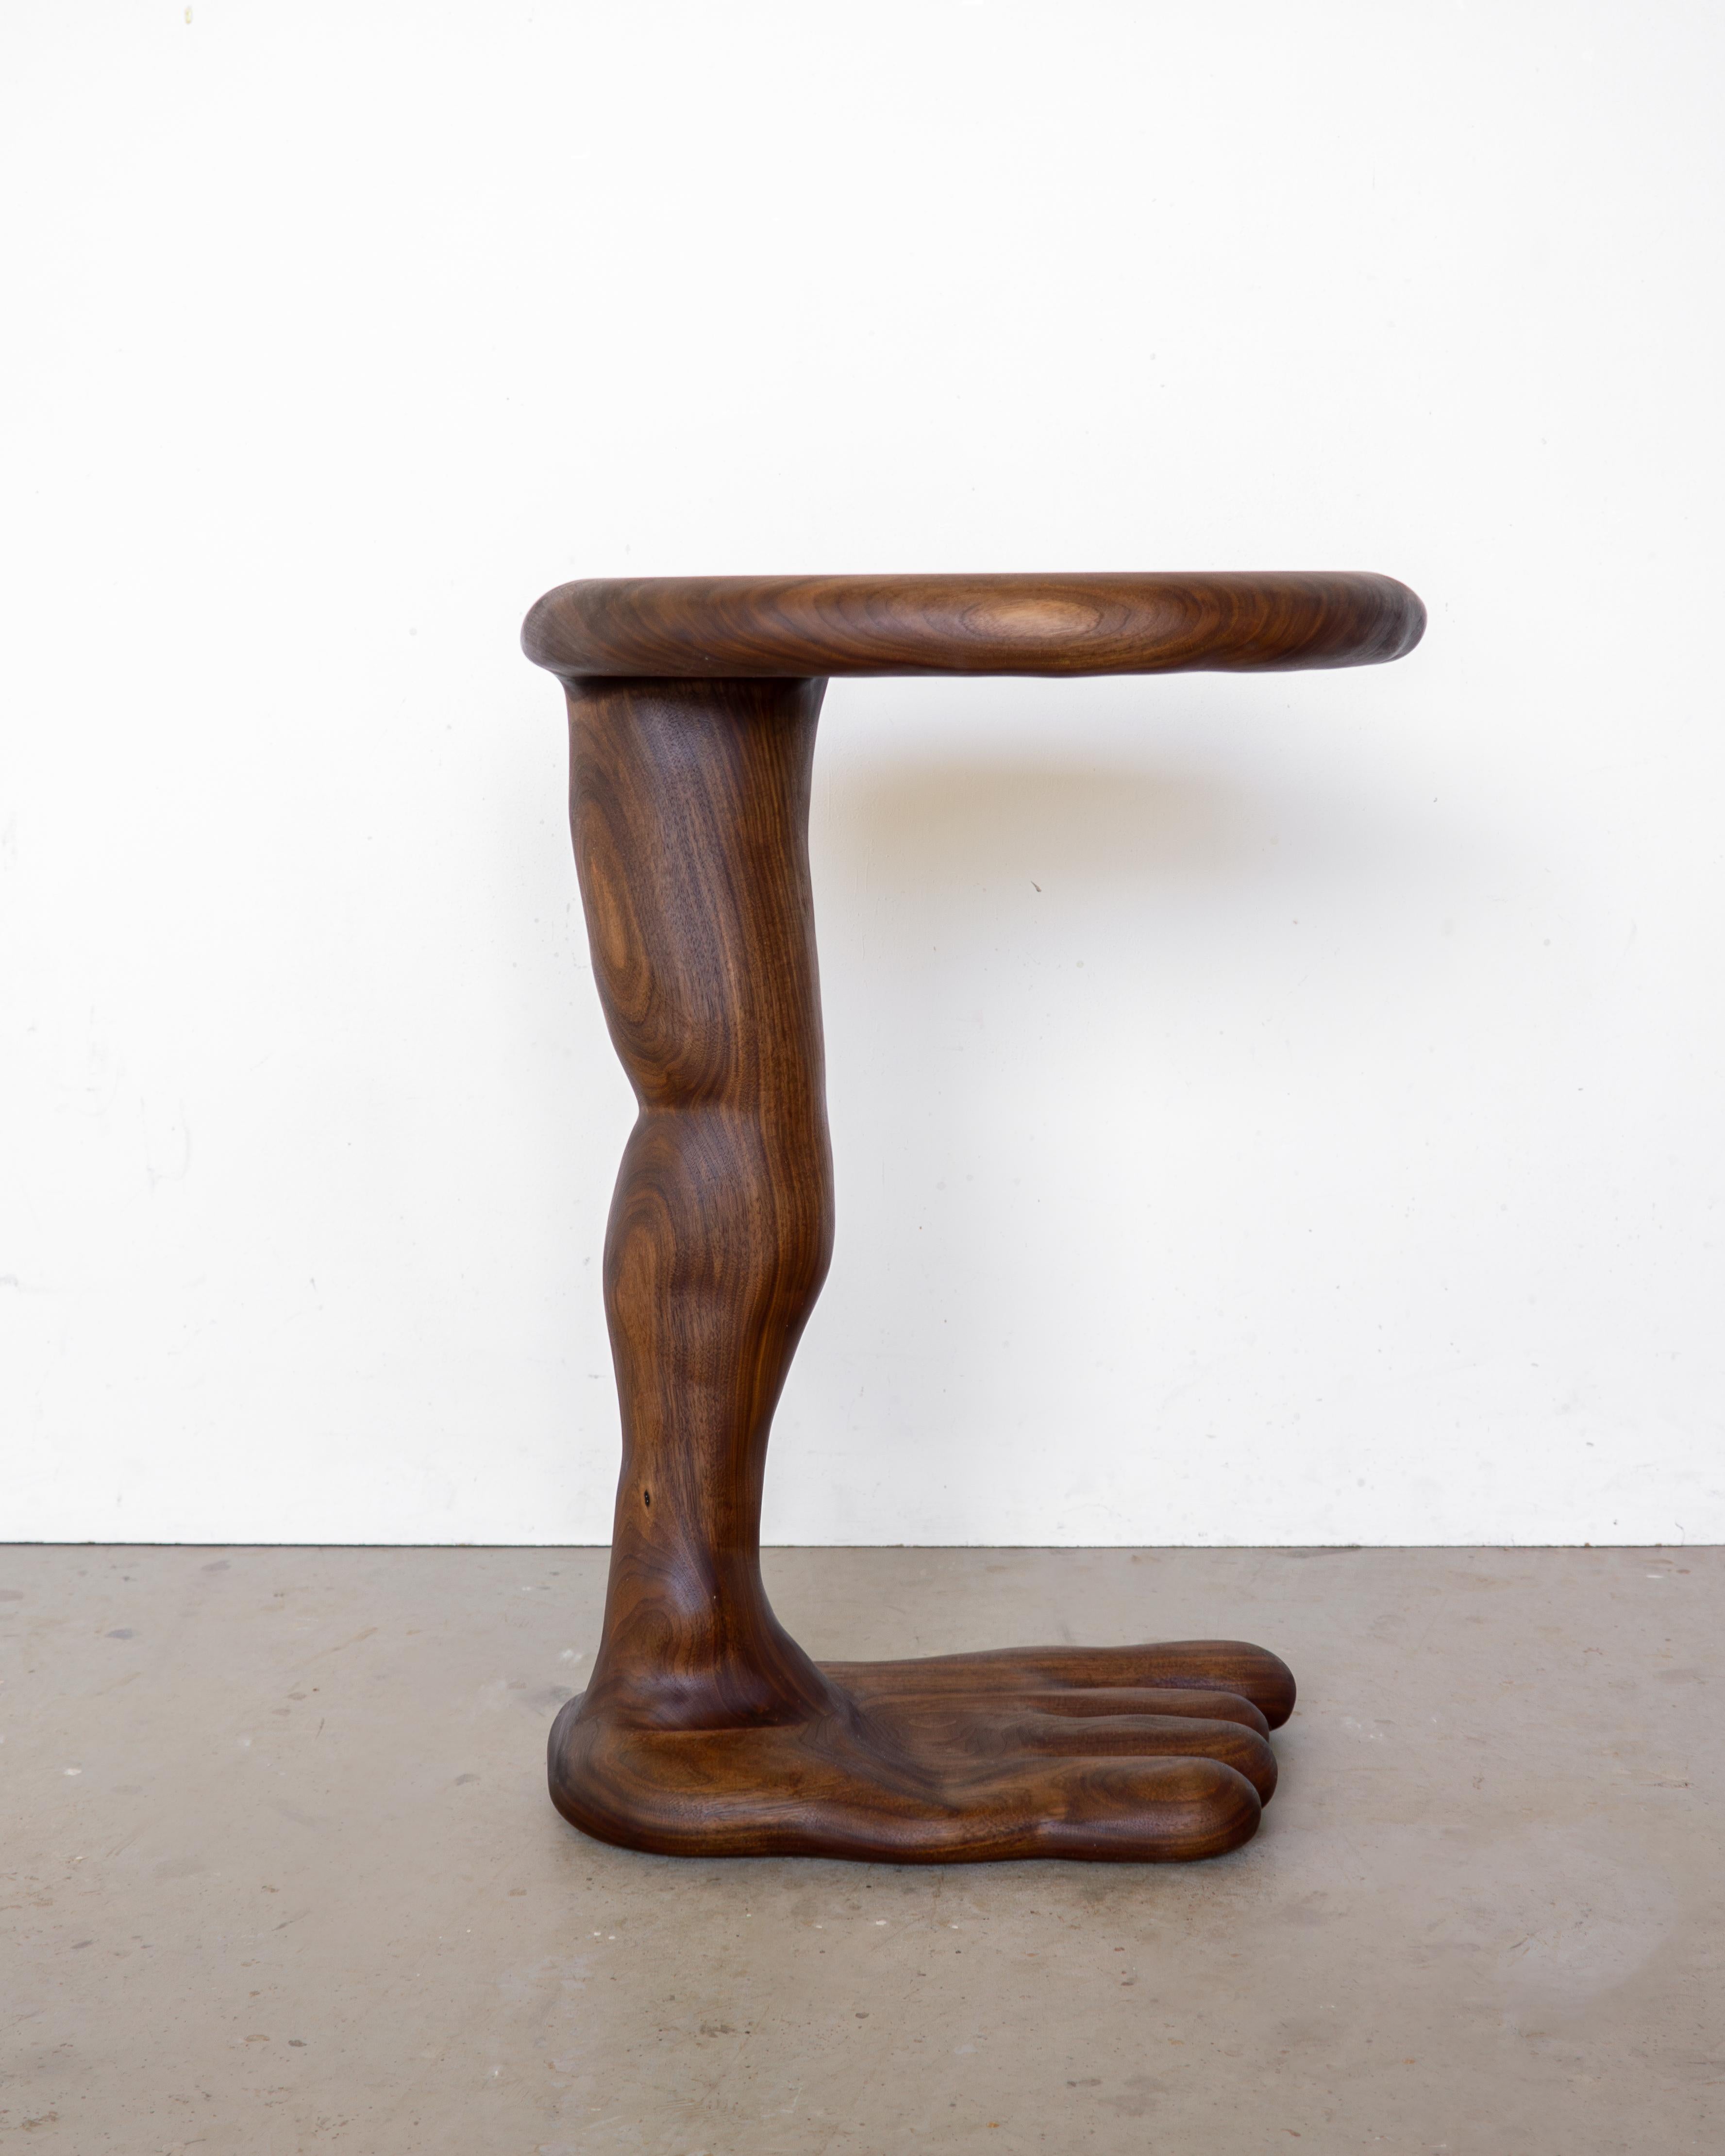 The Leg Side Table is sculpted using various hand tools, making each piece unique with its own distinctive wood grain. 

It is made from high-quality walnut wood and finished with a natural hardwax oil, providing protection to the wood in daily use